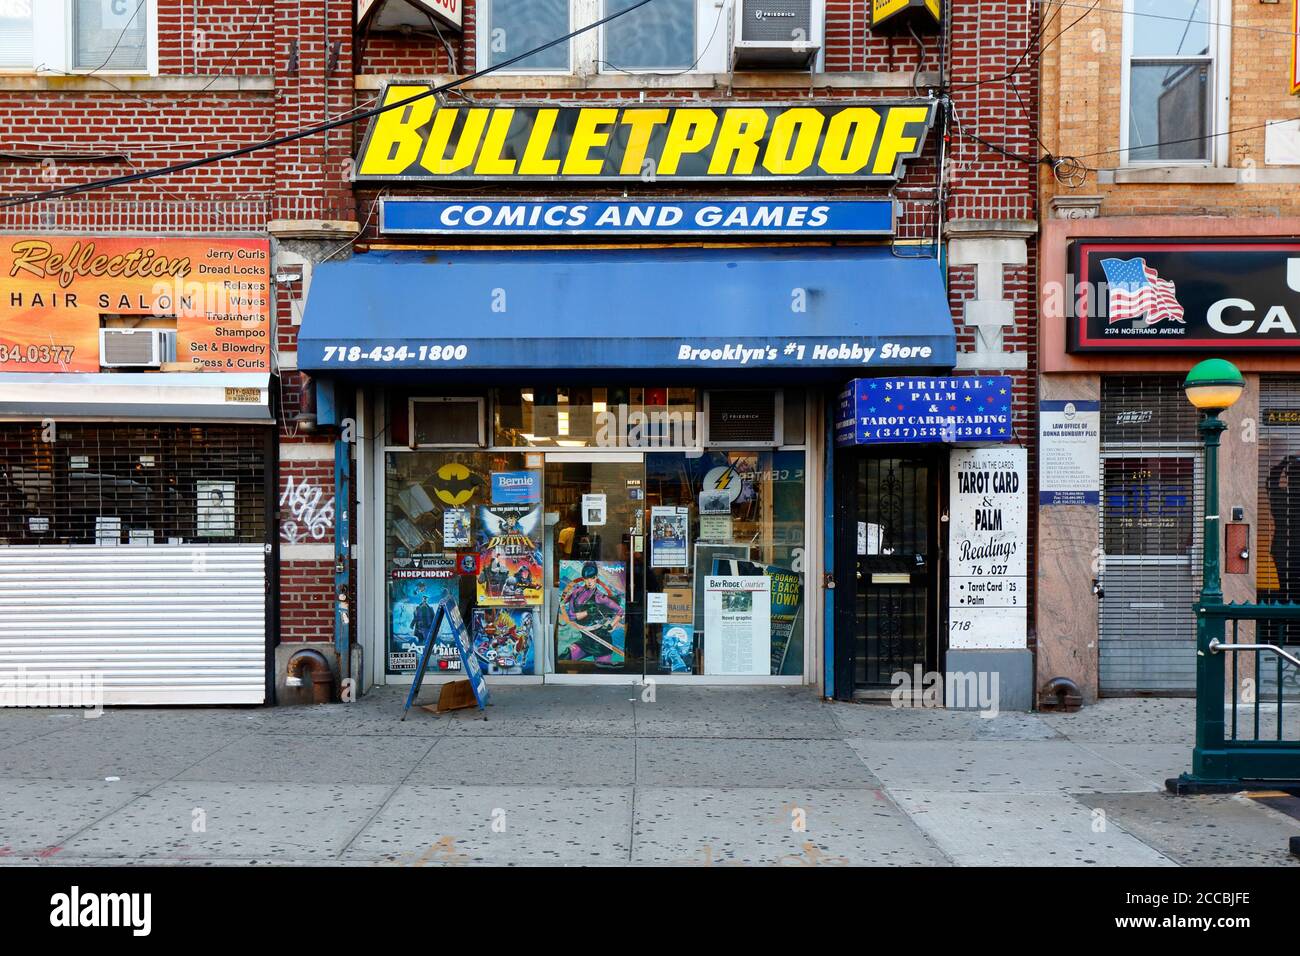 Bulletproof Comics, 2178 Nostrand Ave, Brooklyn, NY. exterior storefront of a comic book and hobby store in the Flatbush neighborhood. Stock Photo